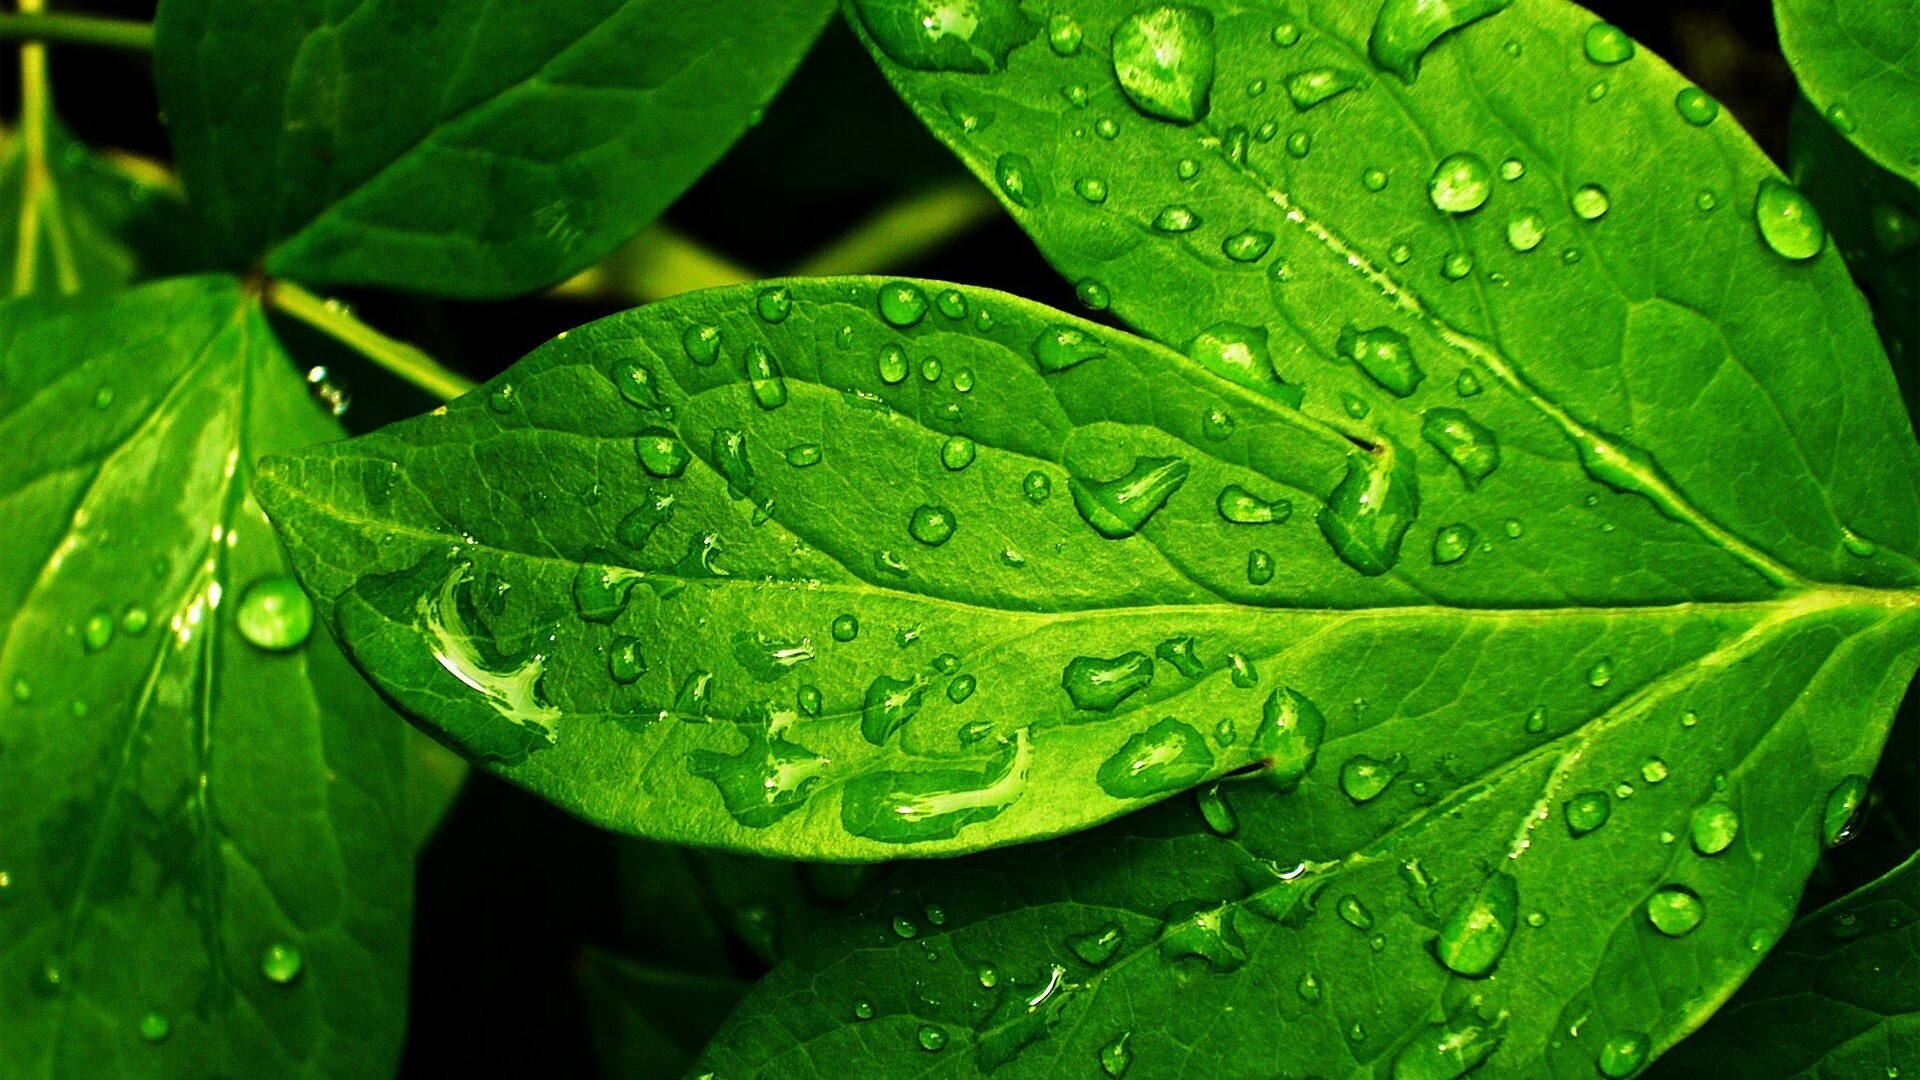 Leaves: Leaf dripping water, Moisture evaporating from plants. 1920x1080 Full HD Background.